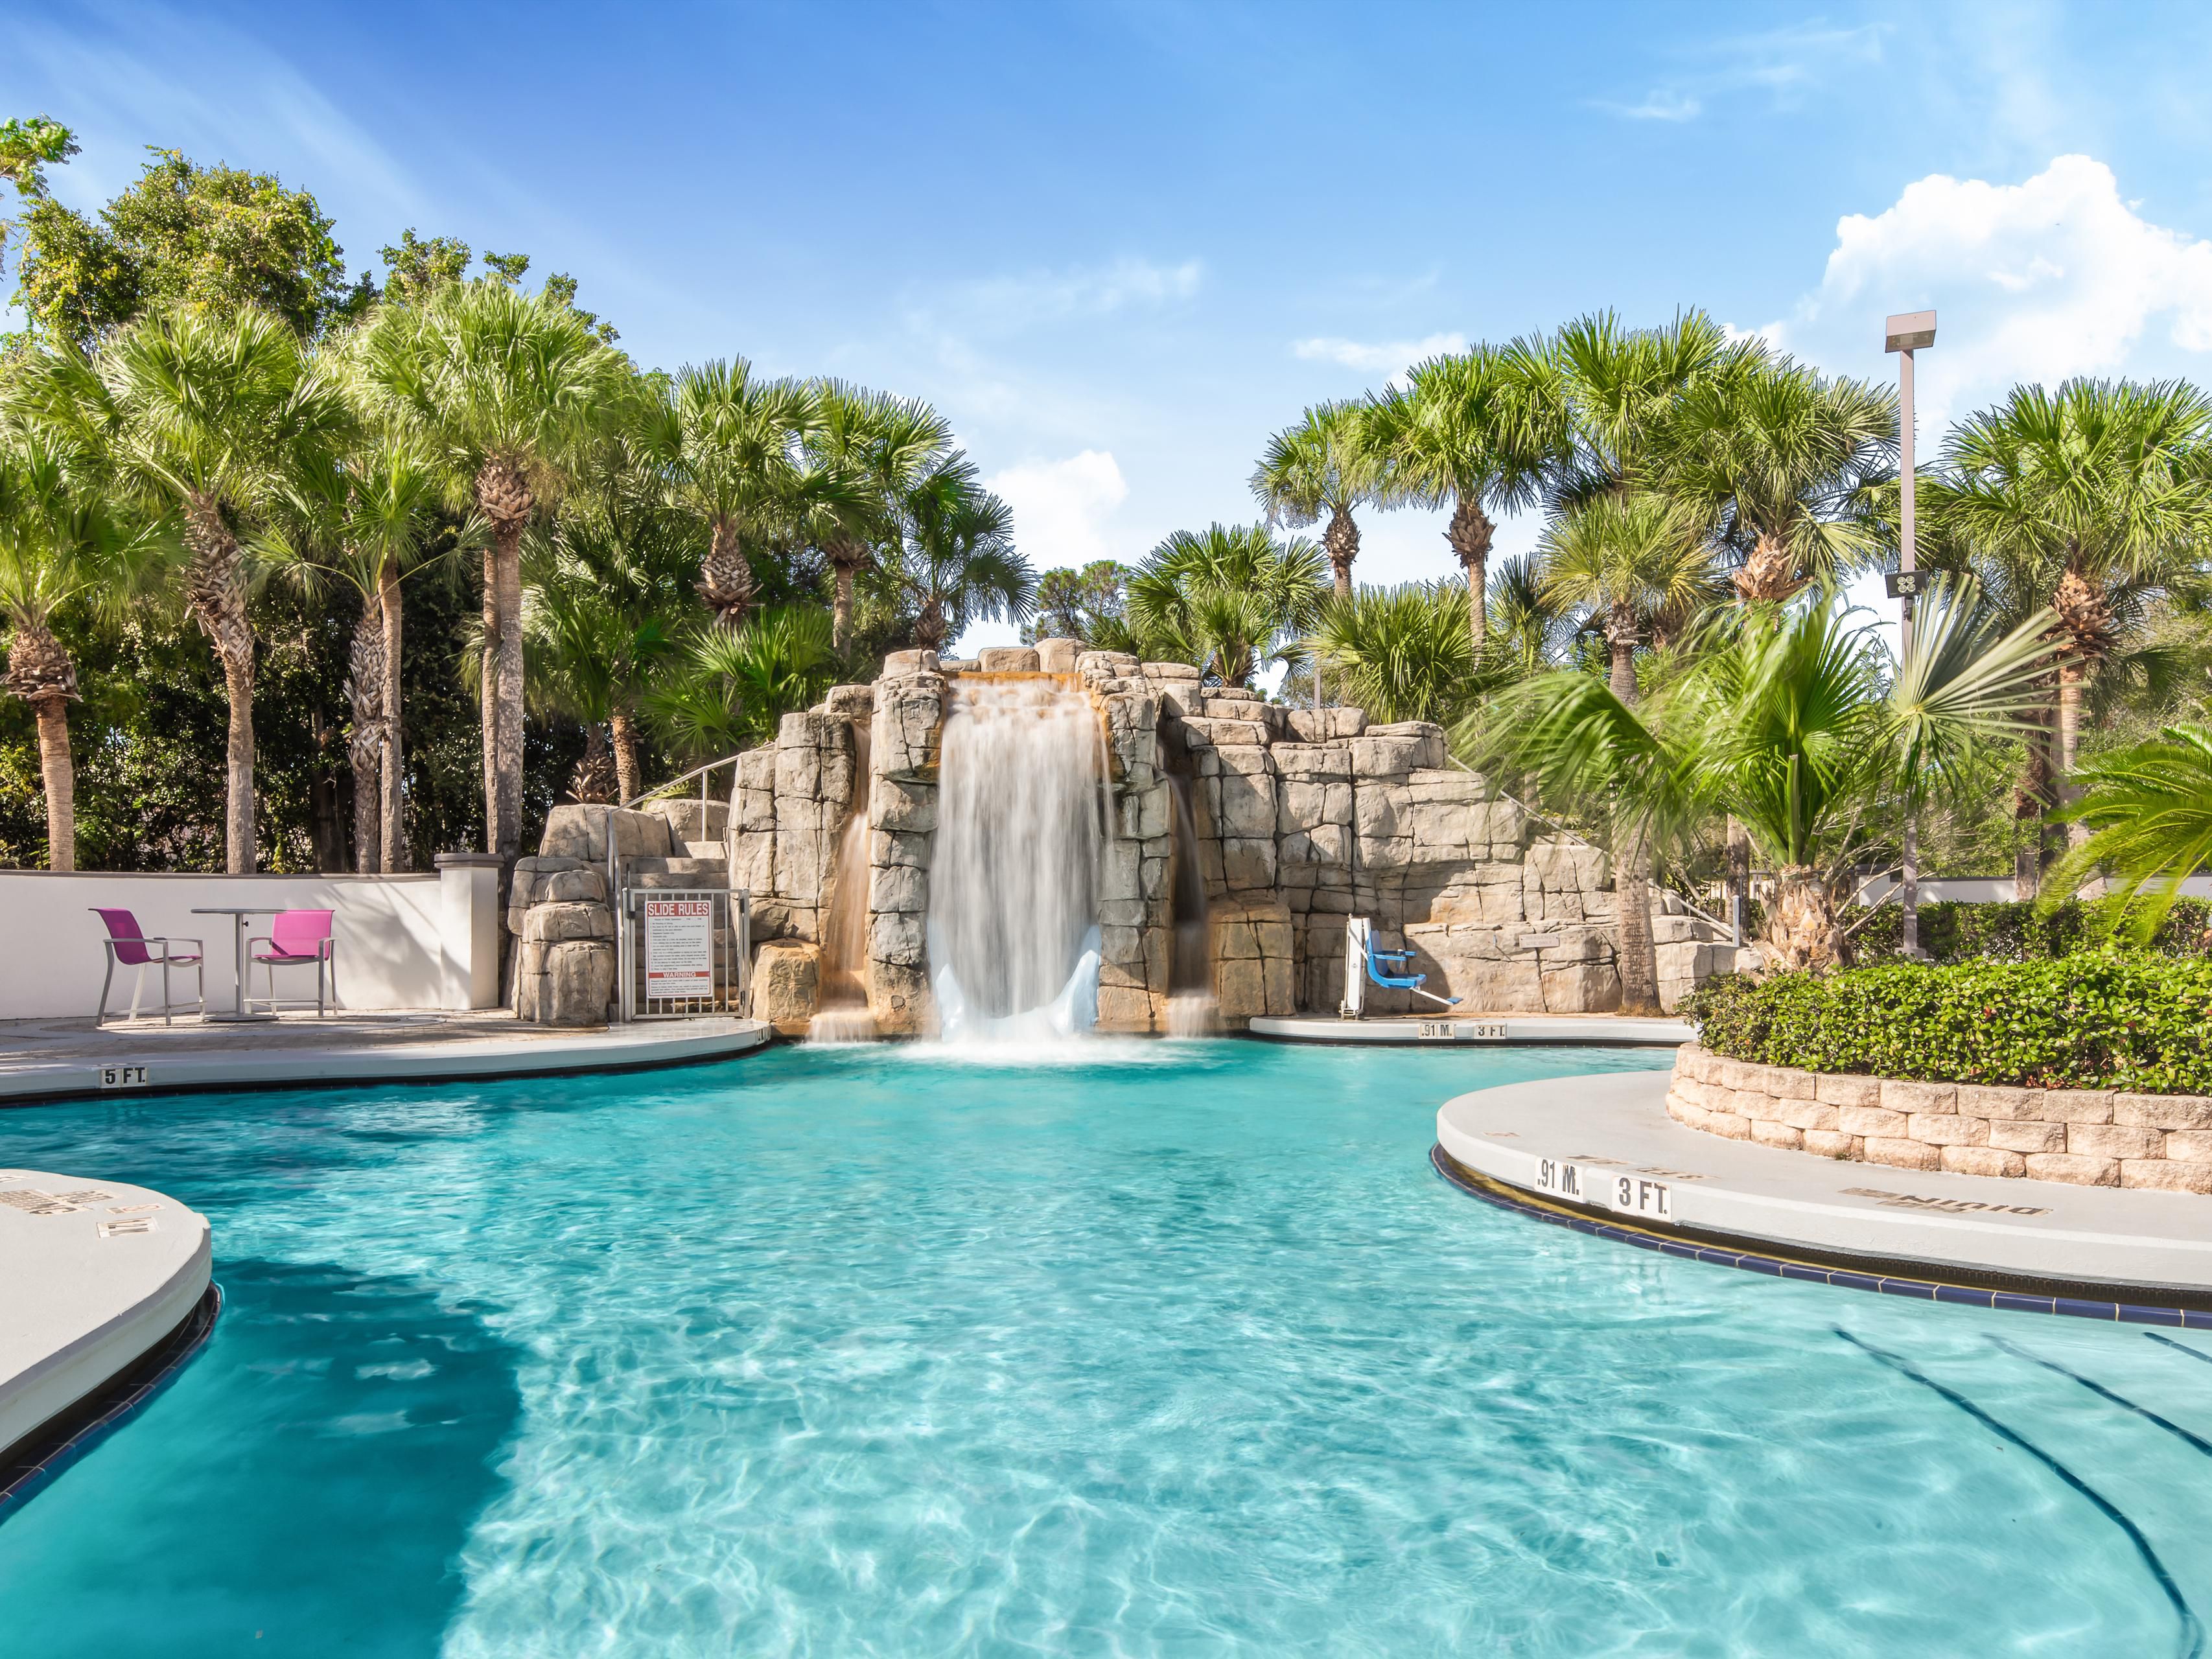 Bask in the Florida sunshine and cool off with a swim in our sparkling outdoor pool. Relax surrounded by views of the palm tree landscape and soothing waterfall. Let the kids glide down the 50-foot waterslide while you lounge poolside with a drink. Experience Florida vacation bliss.